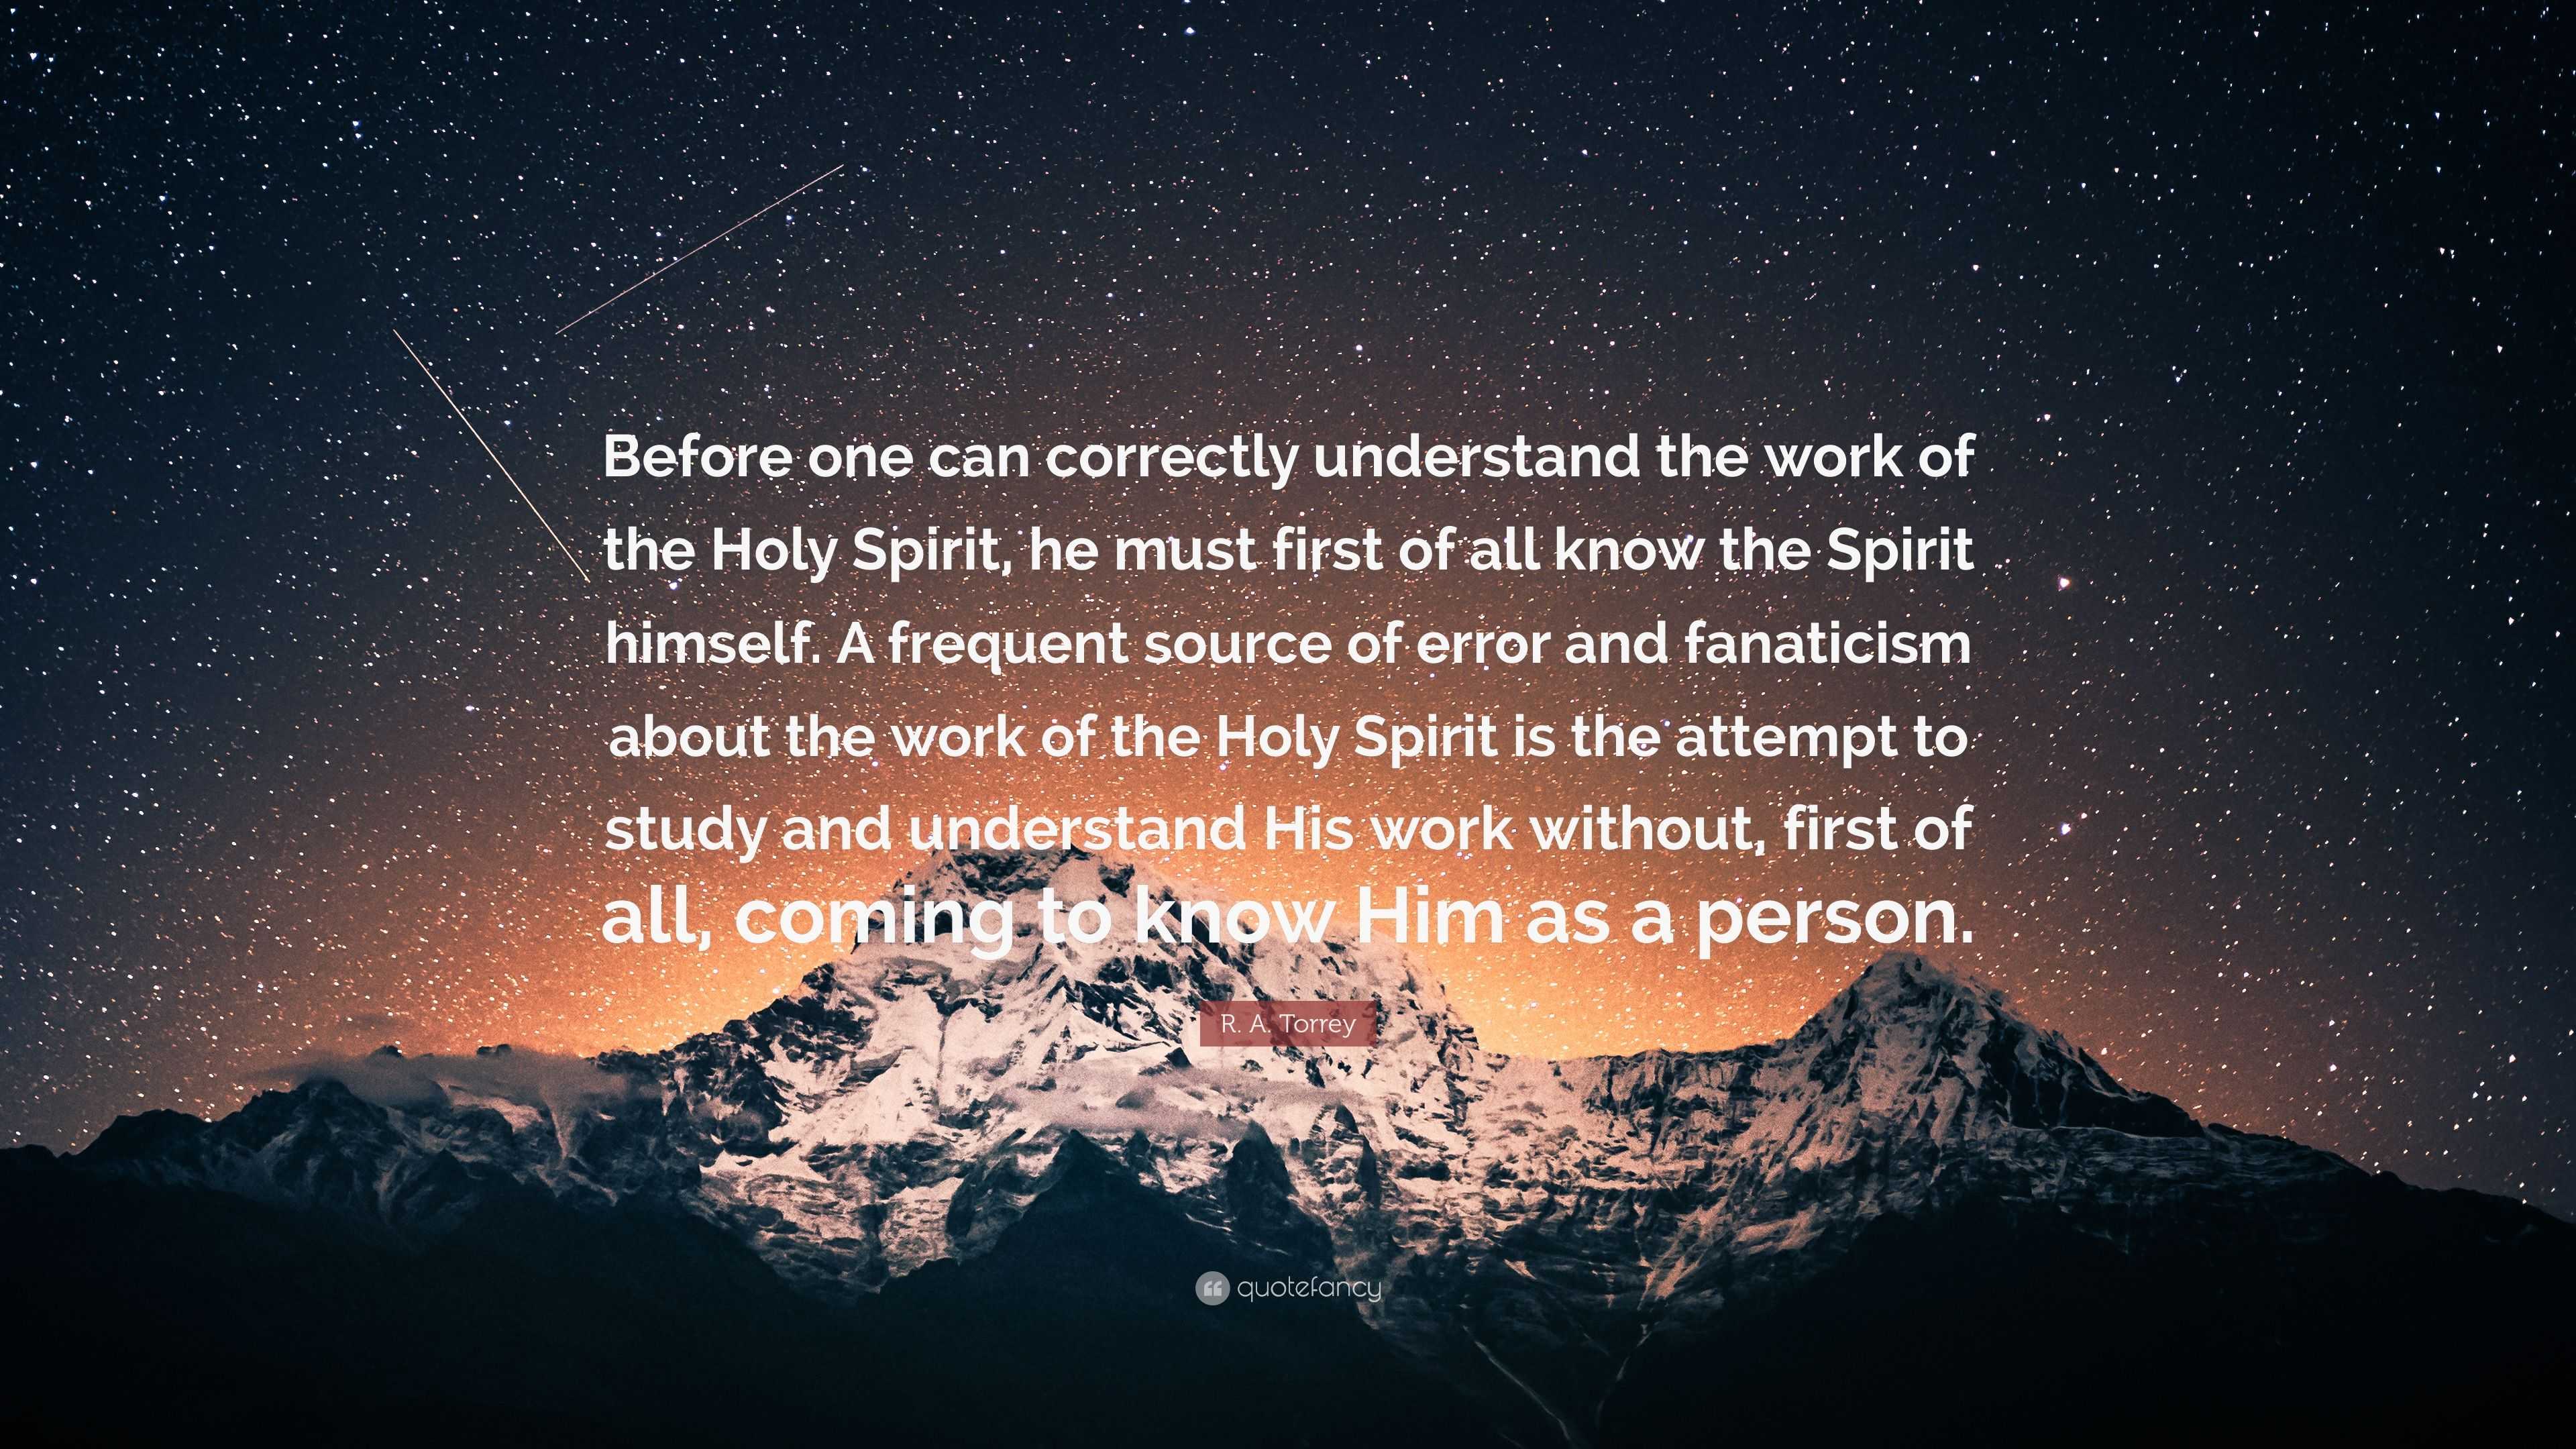 R. A. Torrey Quote: “Before one can correctly understand the work of the  Holy Spirit, he must first of all know the Spirit himself. A frequen”